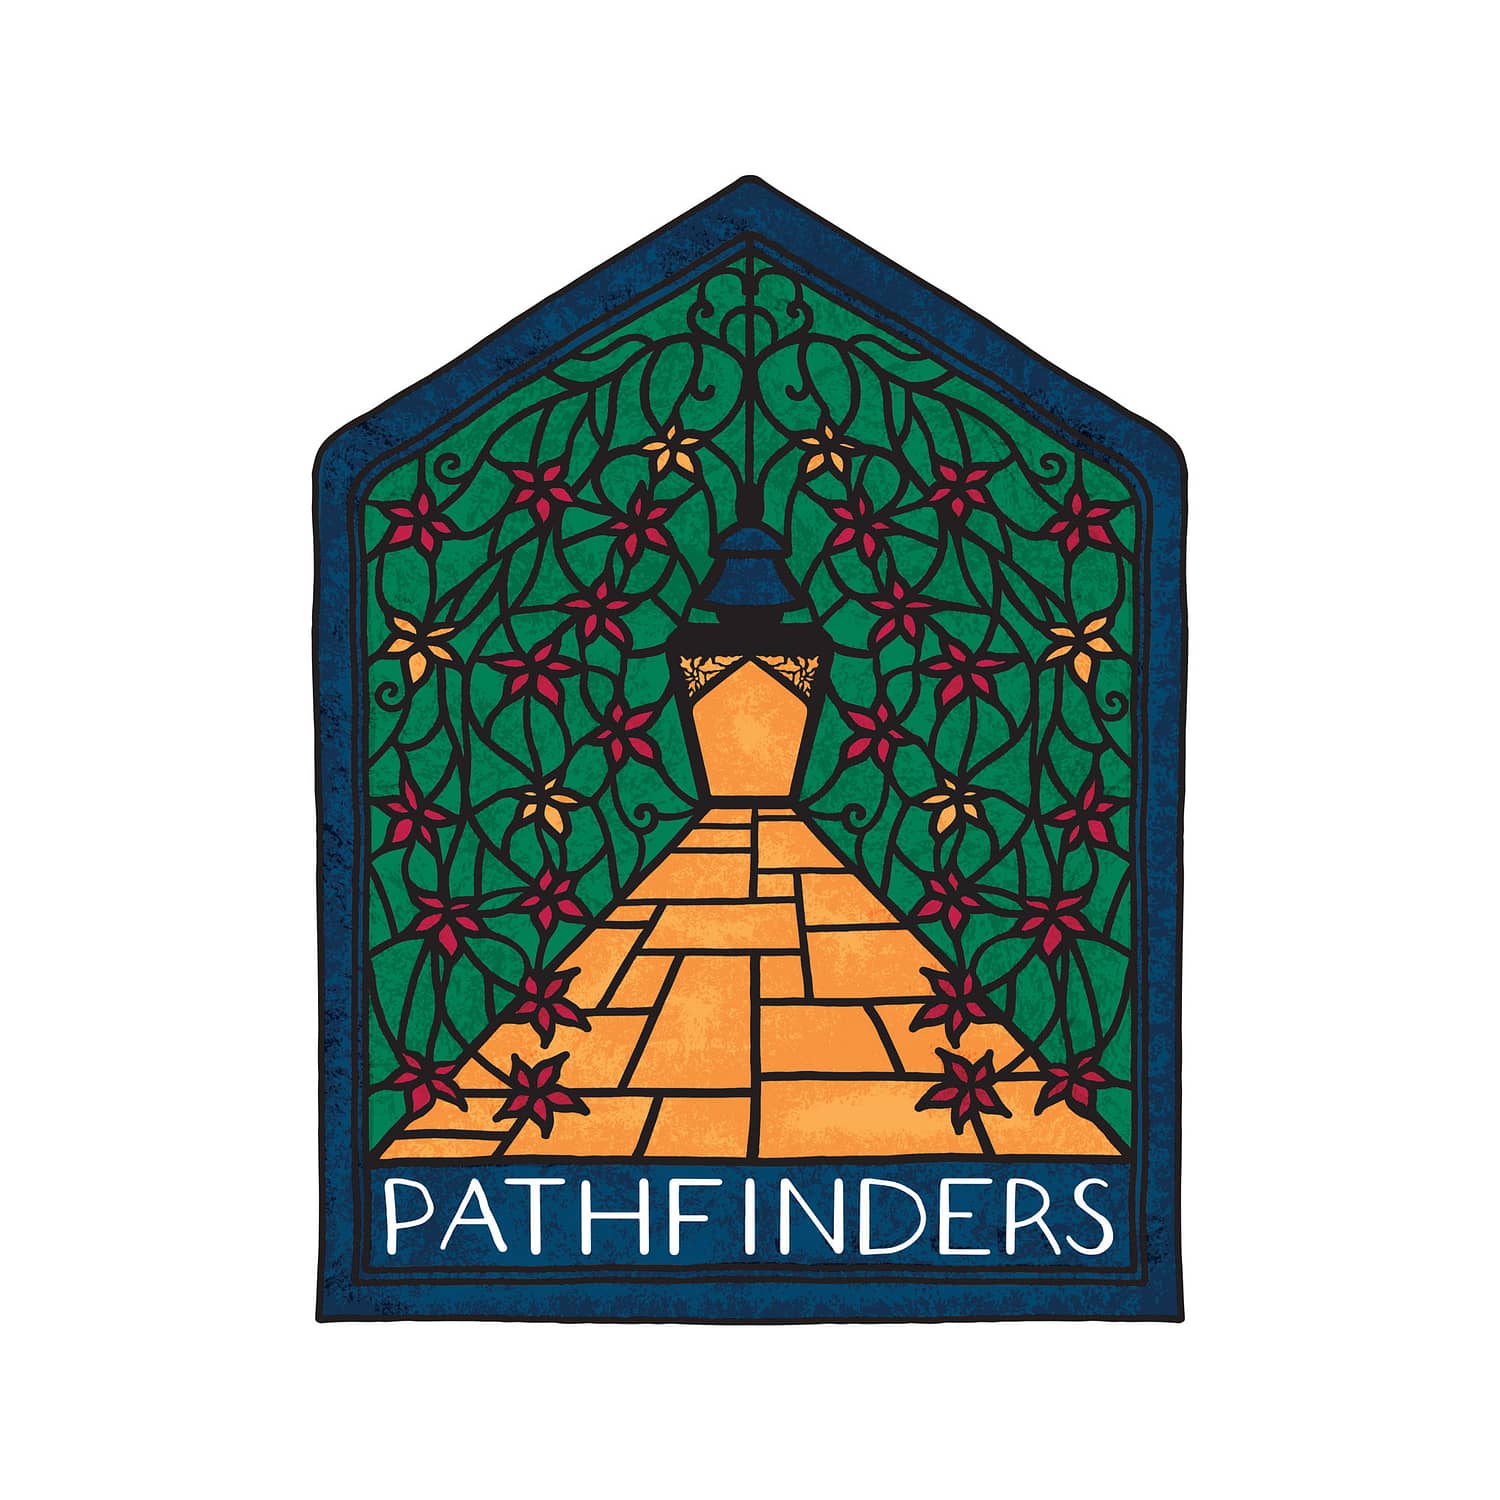 Illustrated logo of a walkway that leads to a gate that is also a lantern hanging from above. The text PATHFINDERS is also visible at the bottom. The image recalls the look and feel of a stain-glass window.